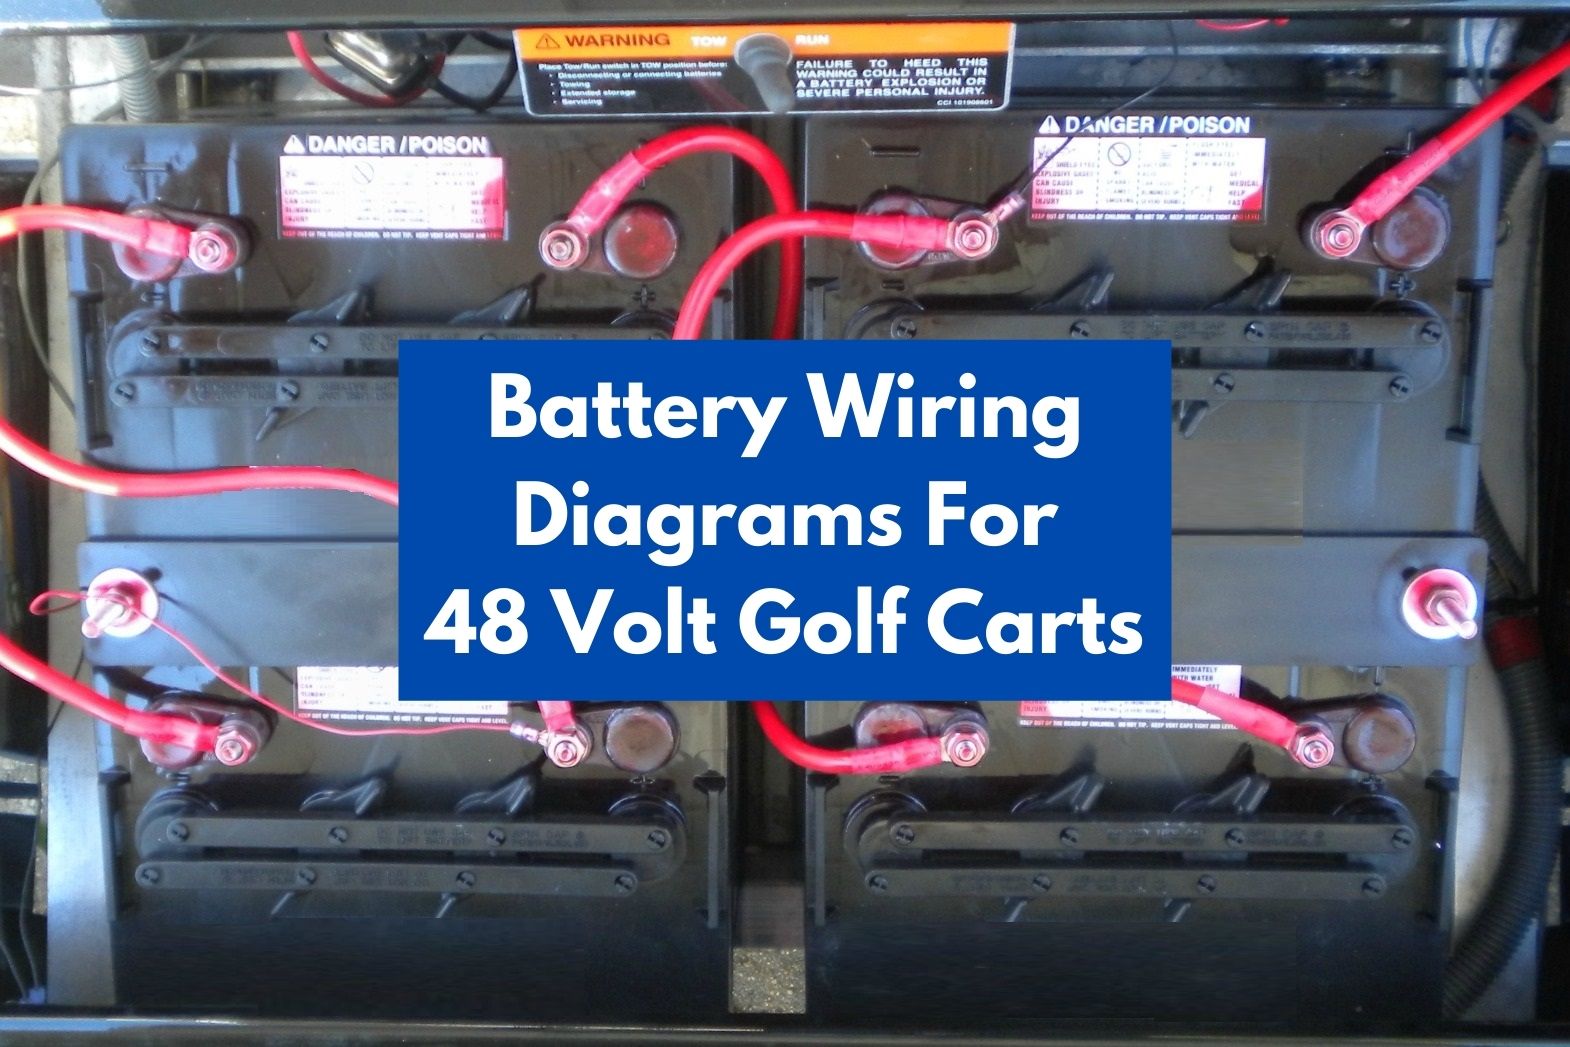 Battery Wiring Diagrams For 48 Volt Golf Carts